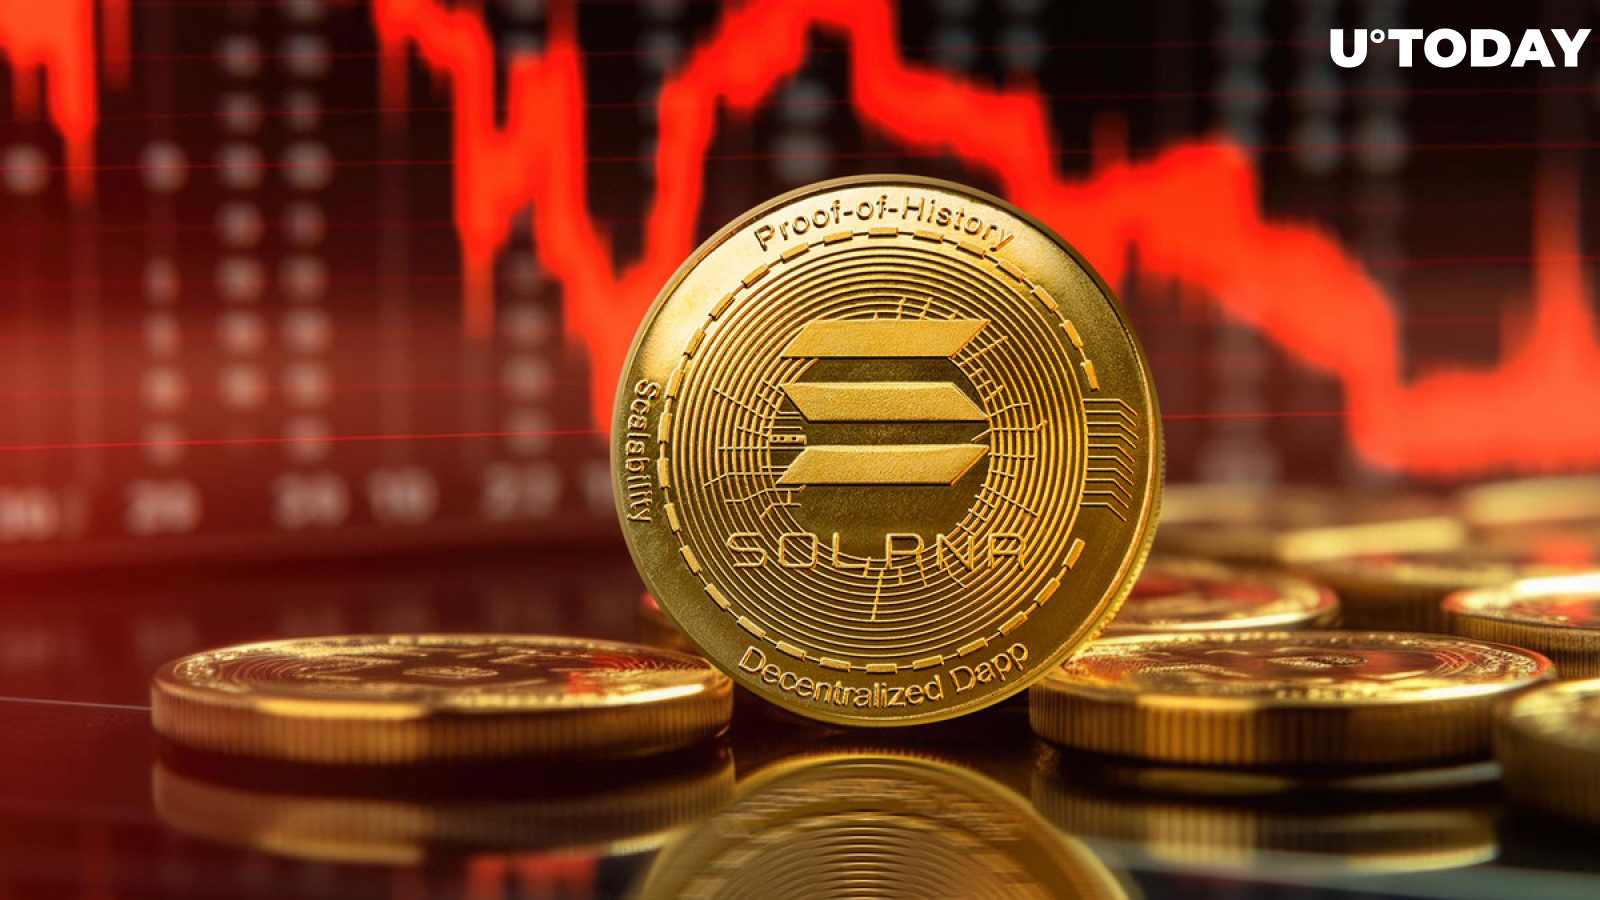 Solana Meme Coins Suffer Worst as Crypto Collapses